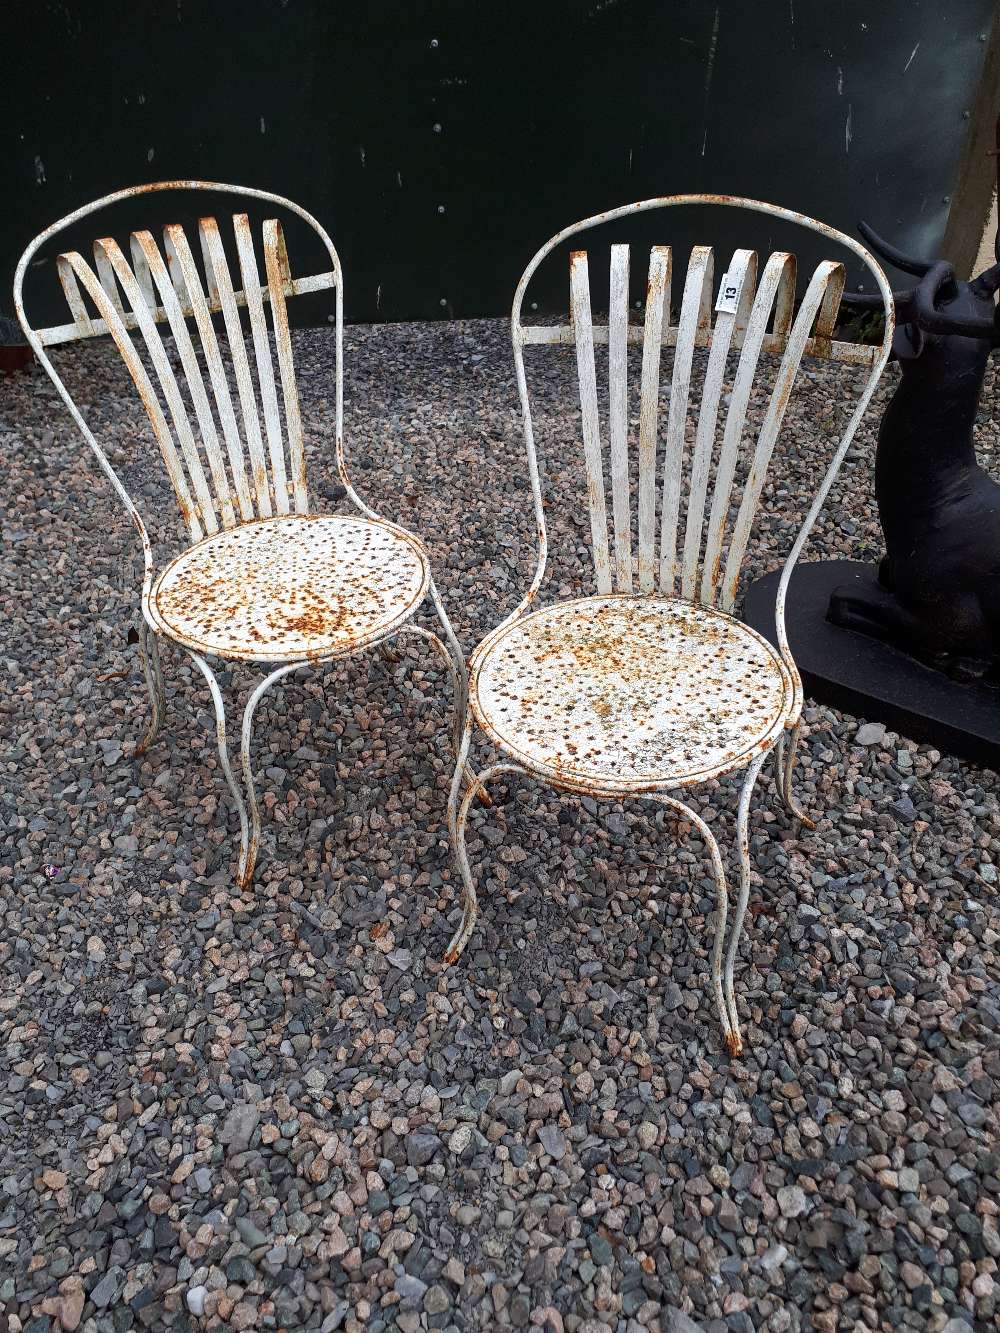 Pair of early 20th C. garden chairs.